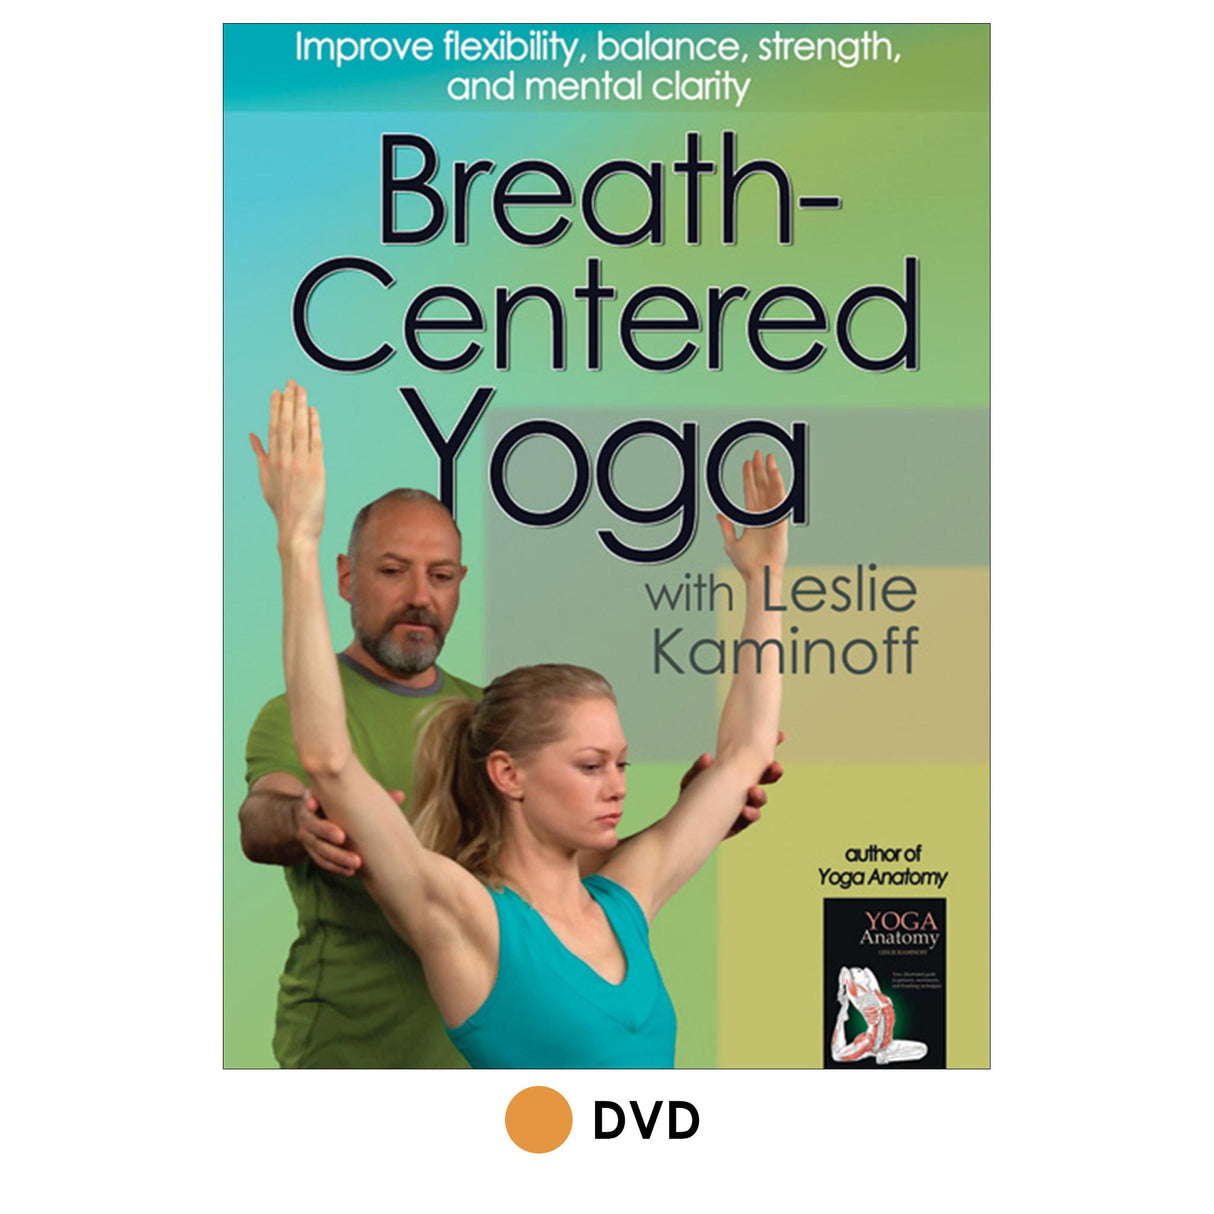 Breath-Centered Yoga with Leslie Kaminoff DVD